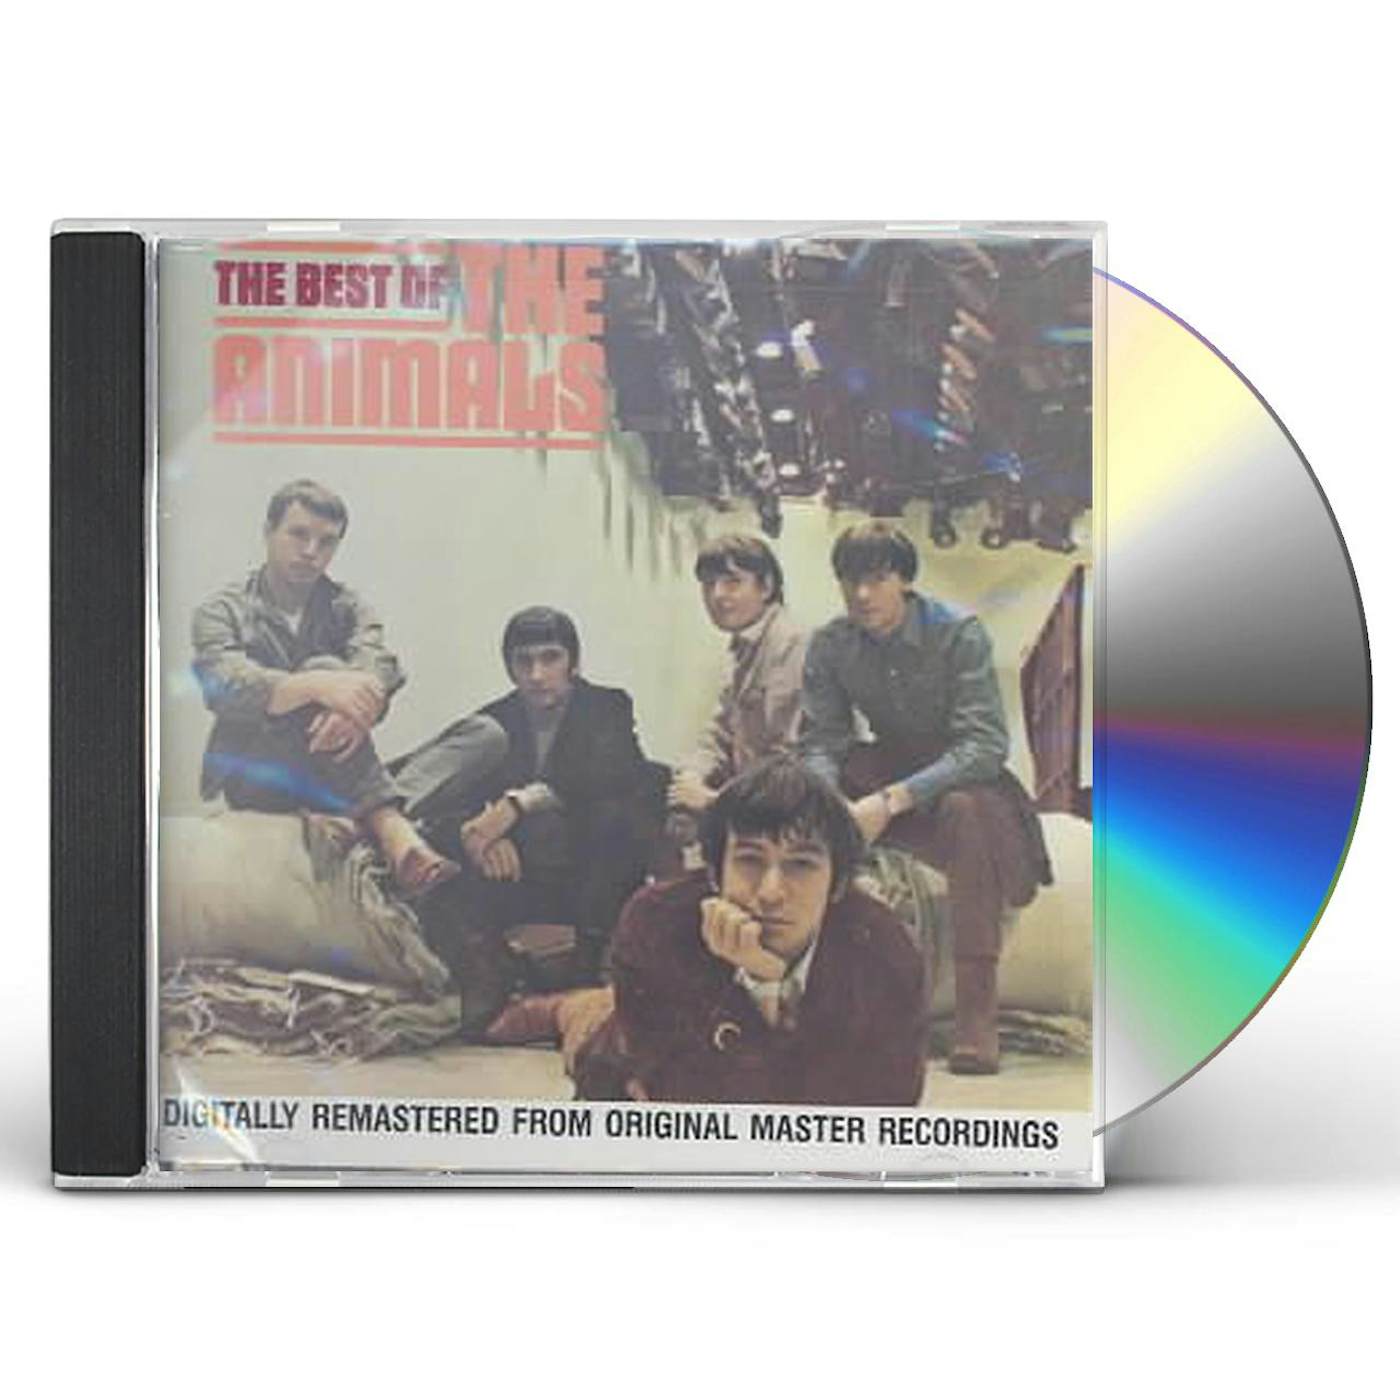 The Animals BEST OF CD